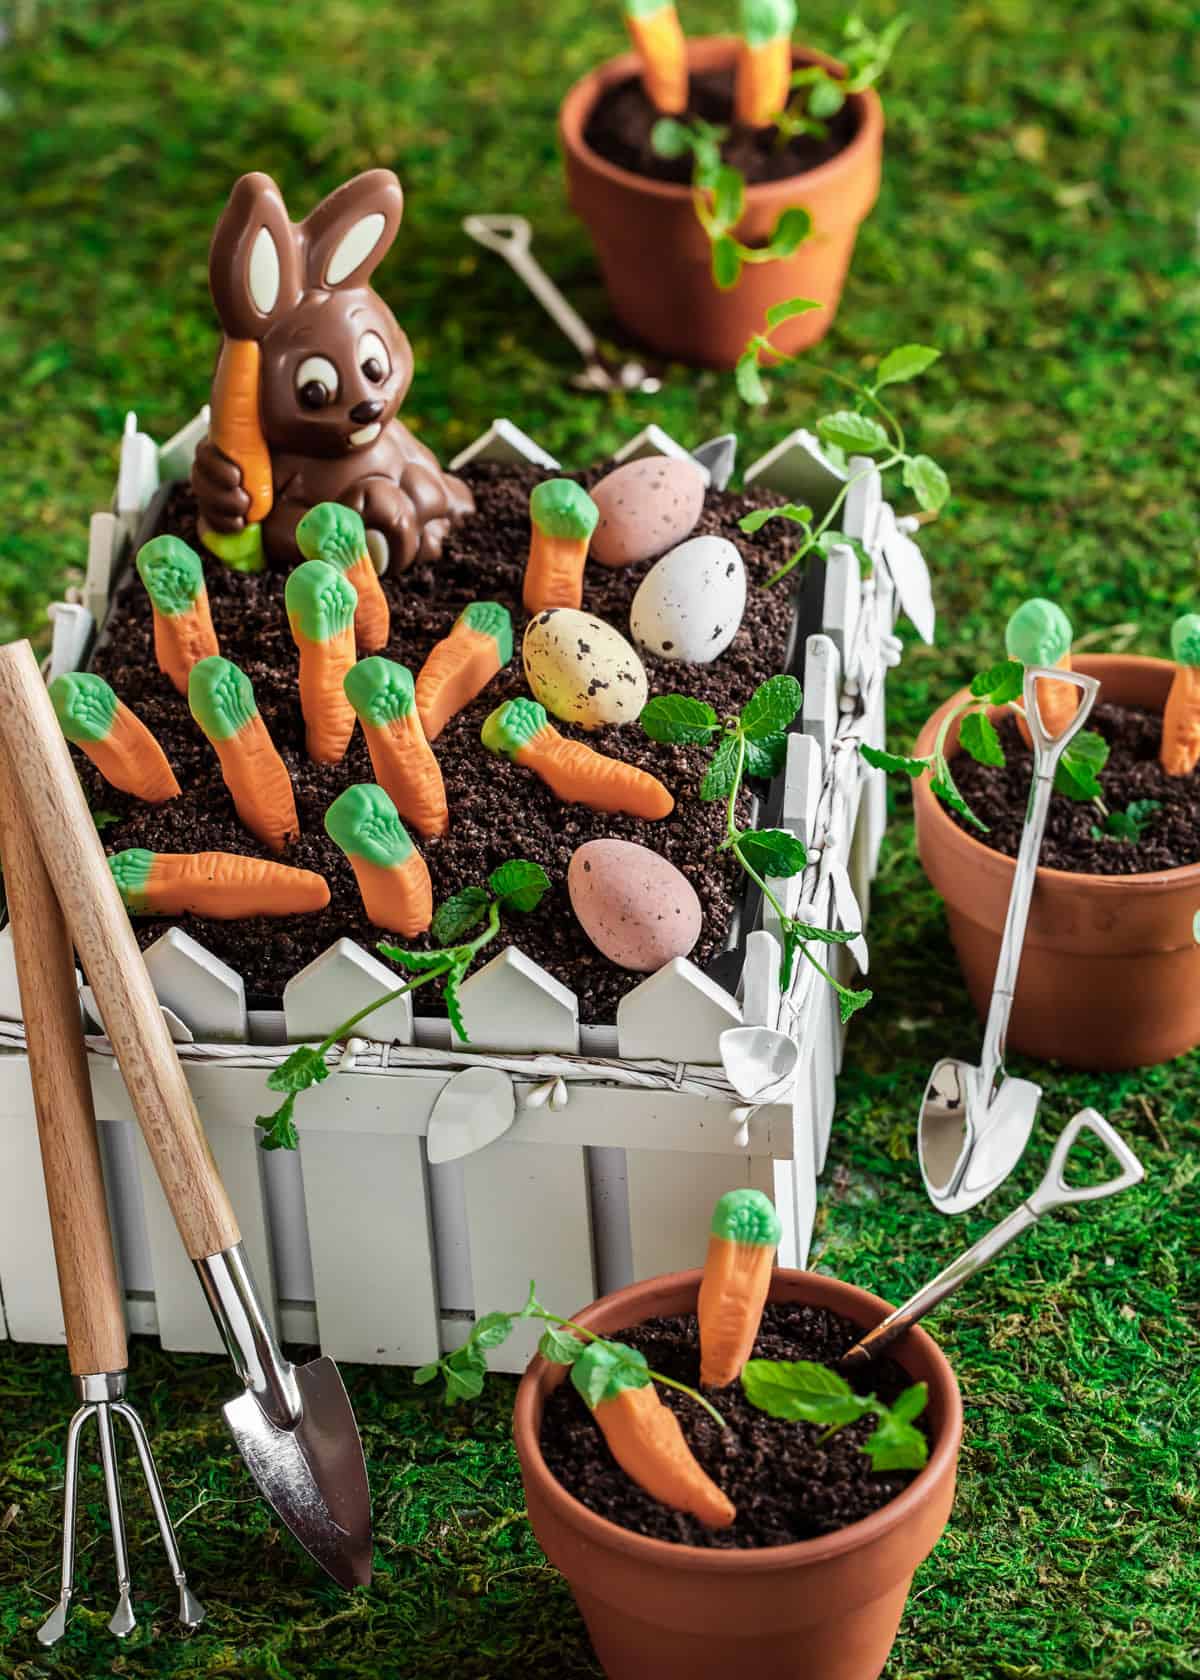 cute Easter garden dirt cake with candy carrots and chocolate bunny, in fence shaped serving vessel, on moss grass runner.